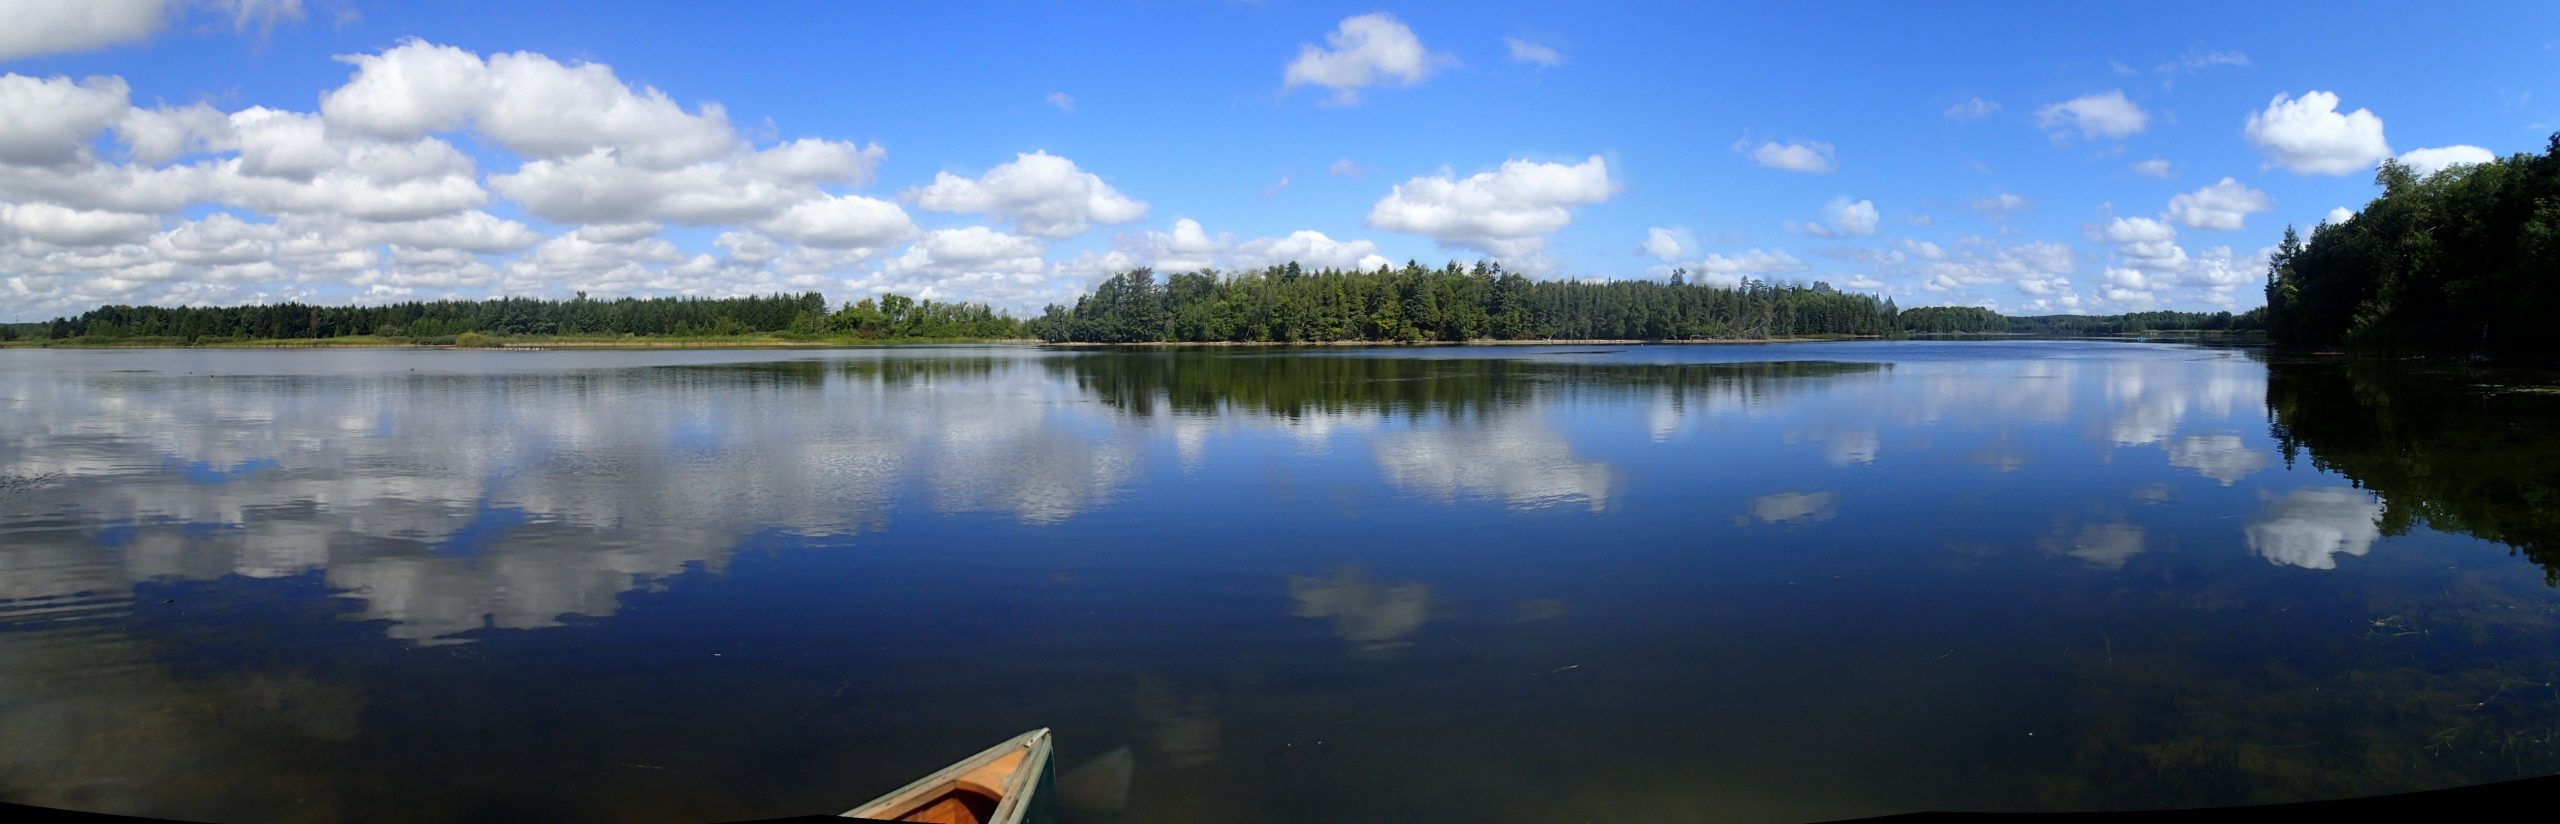 Panorama Of Island Lake Conservation Area